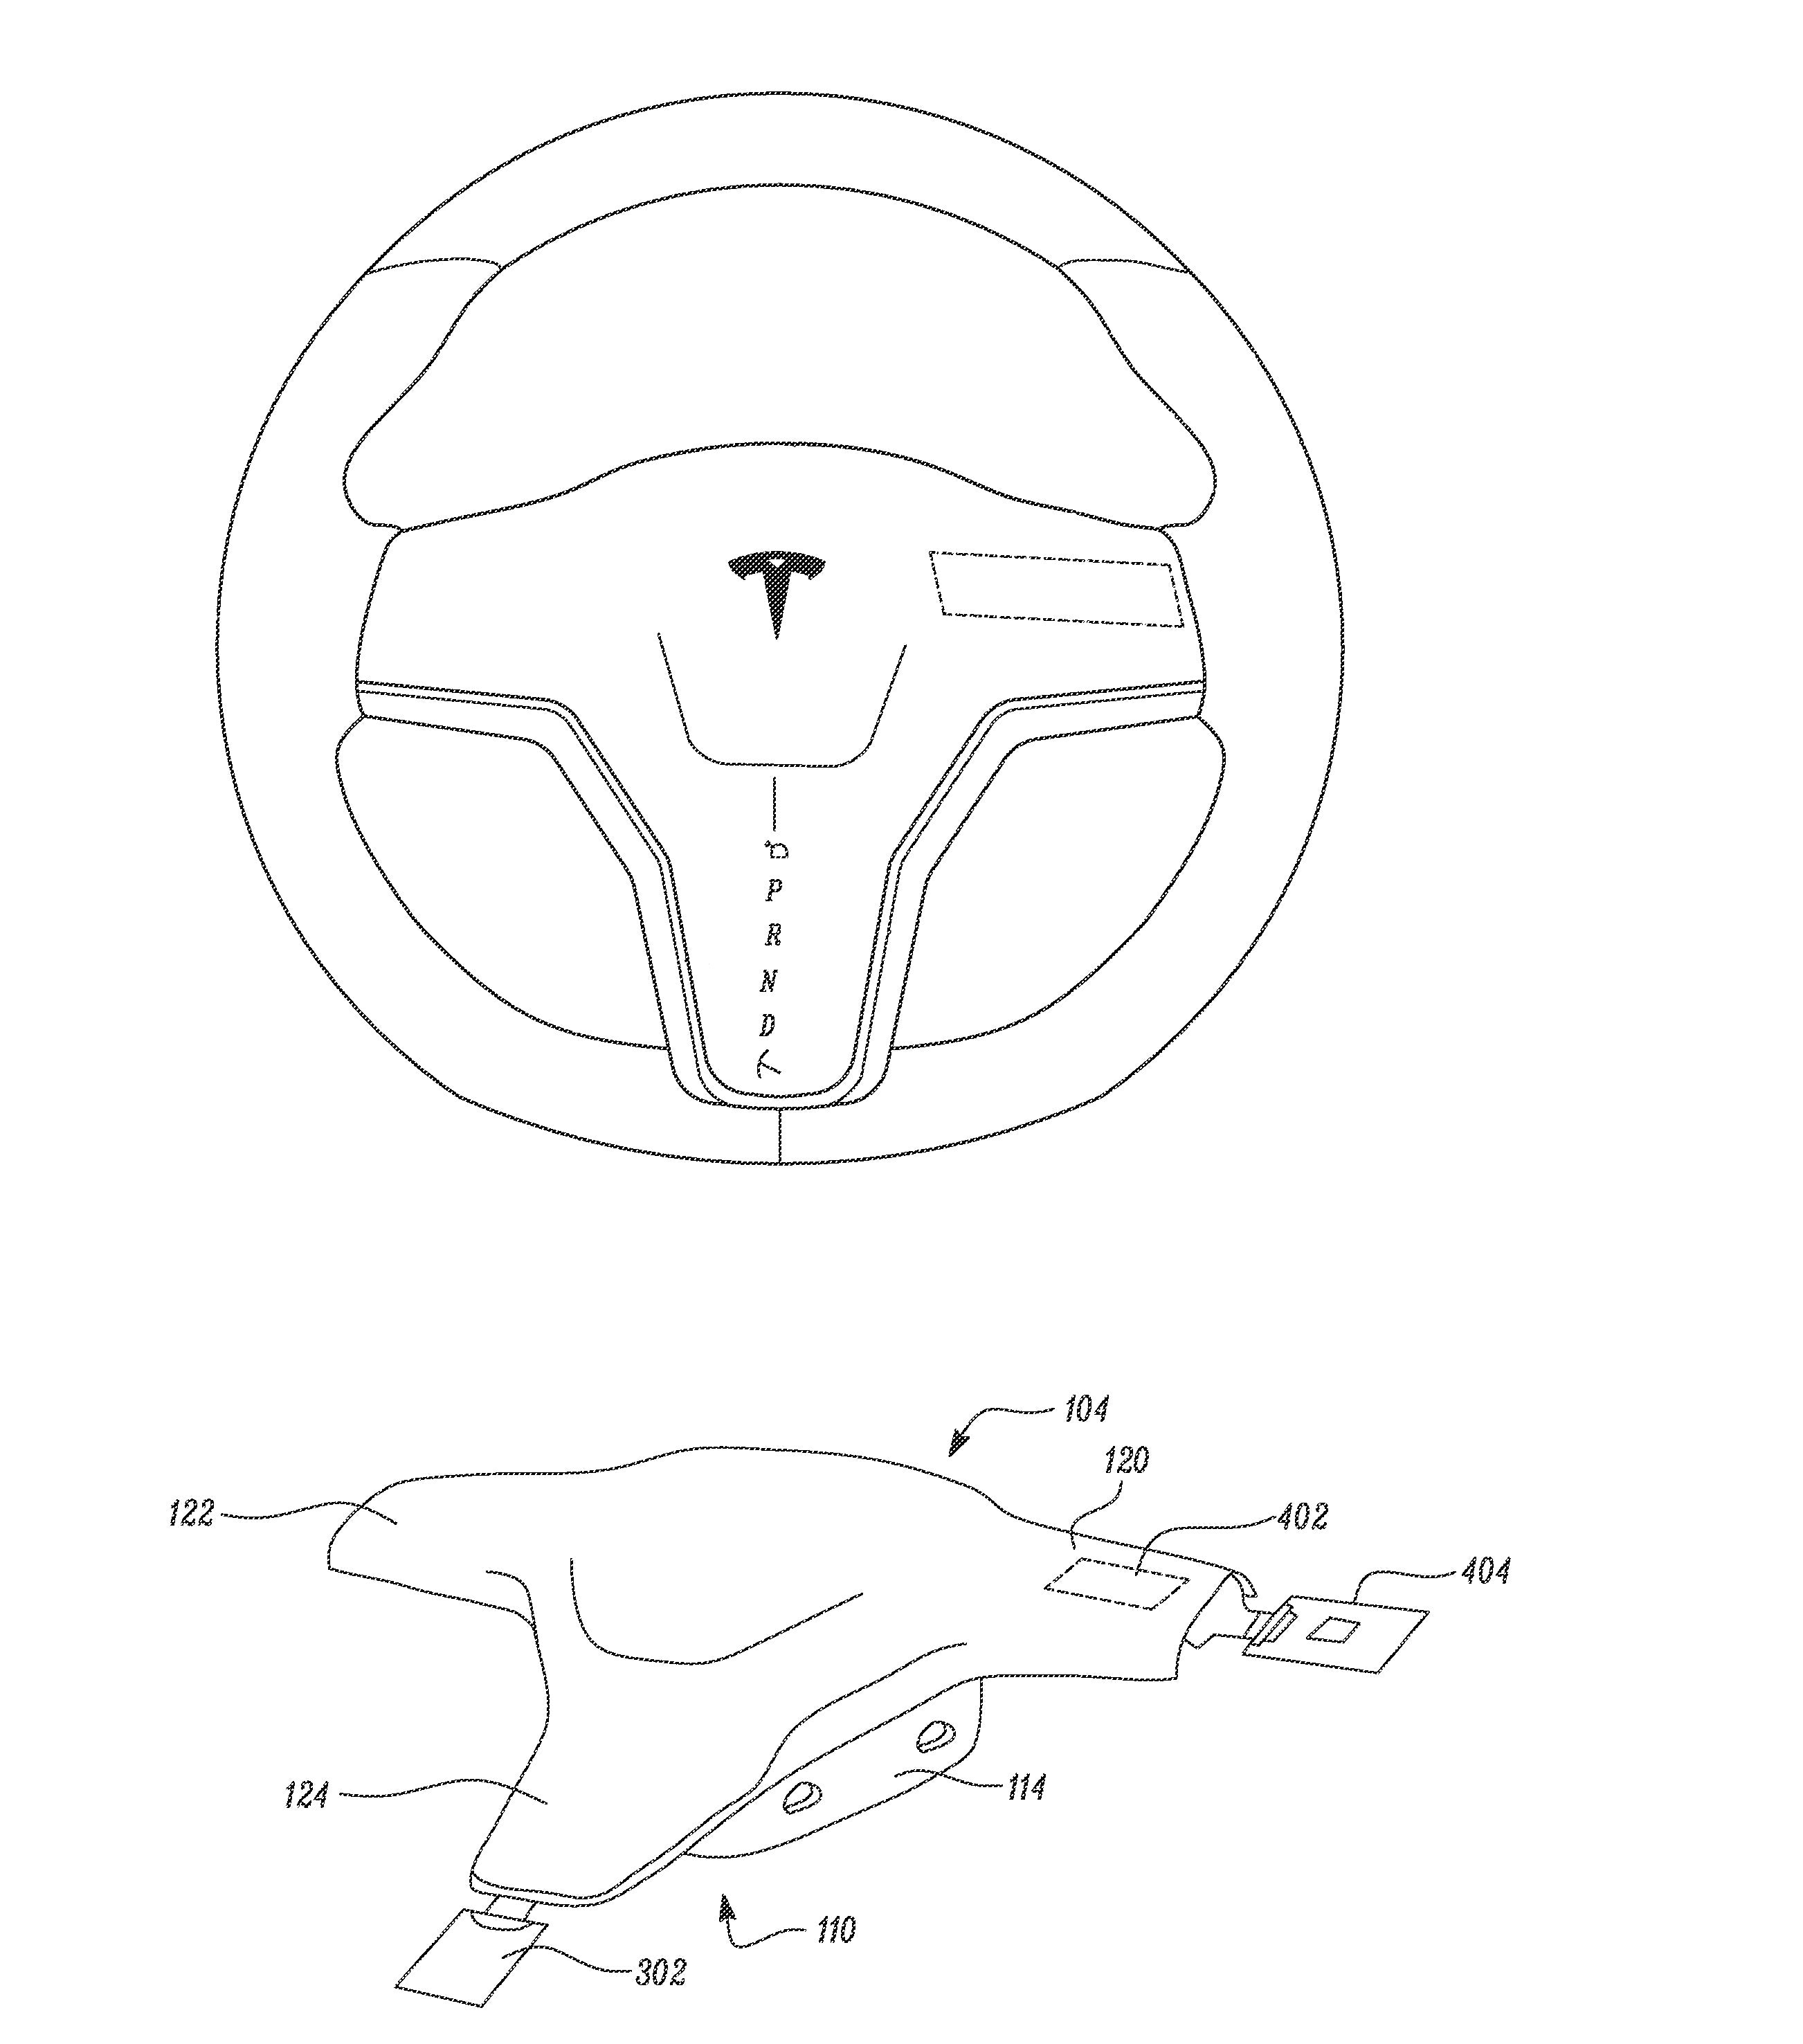 Tesla filed a patent 'Steering wheel assembly'